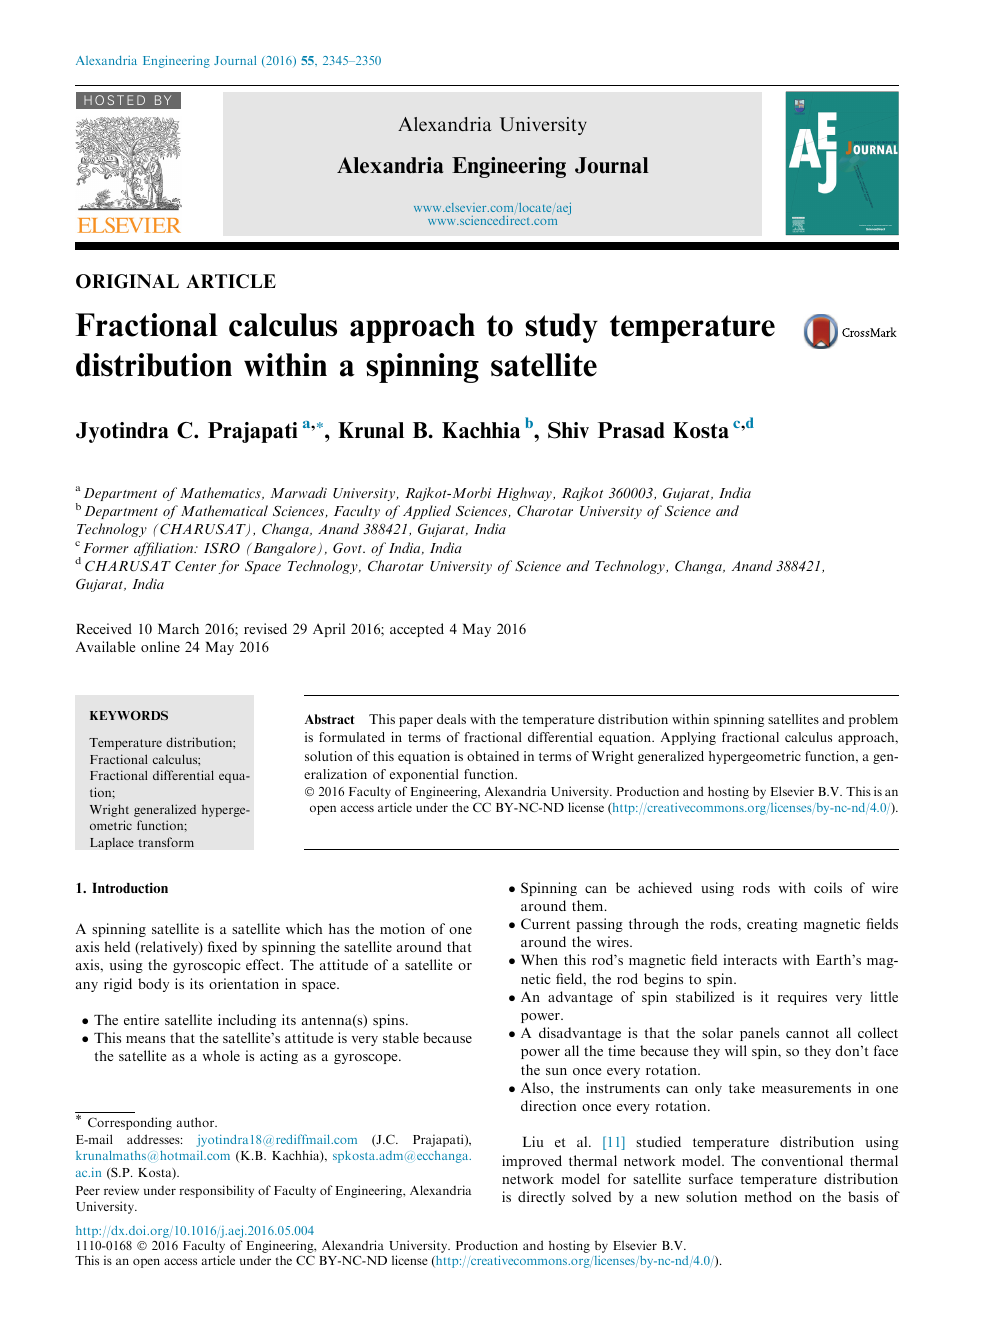 Fractional Calculus Approach To Study Temperature Distribution Within A Spinning Satellite Topic Of Research Paper In Mathematics Download Scholarly Article Pdf And Read For Free On Cyberleninka Open Science Hub